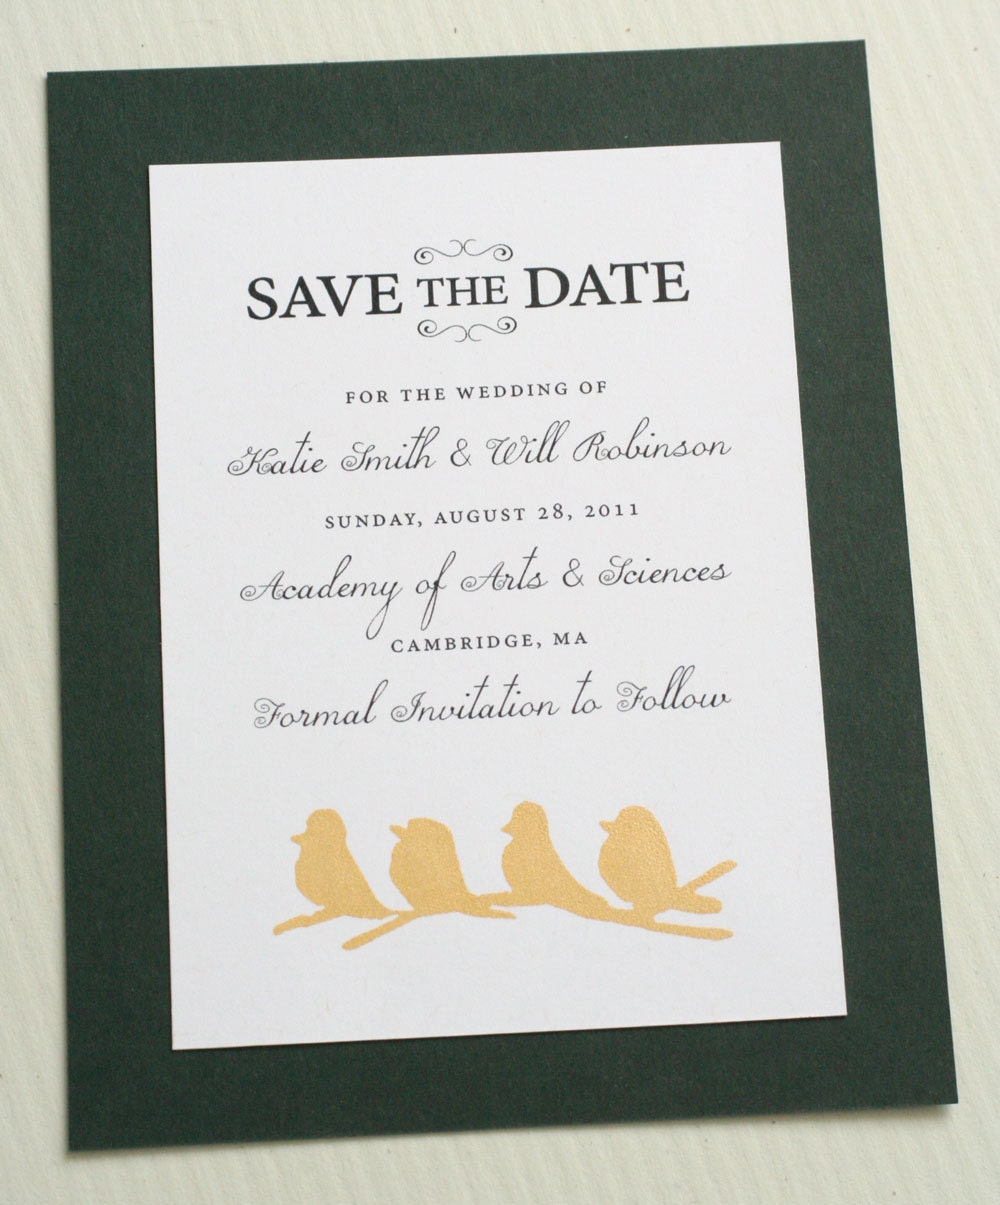 Four little birds screen-printed in metallic gold save the date card